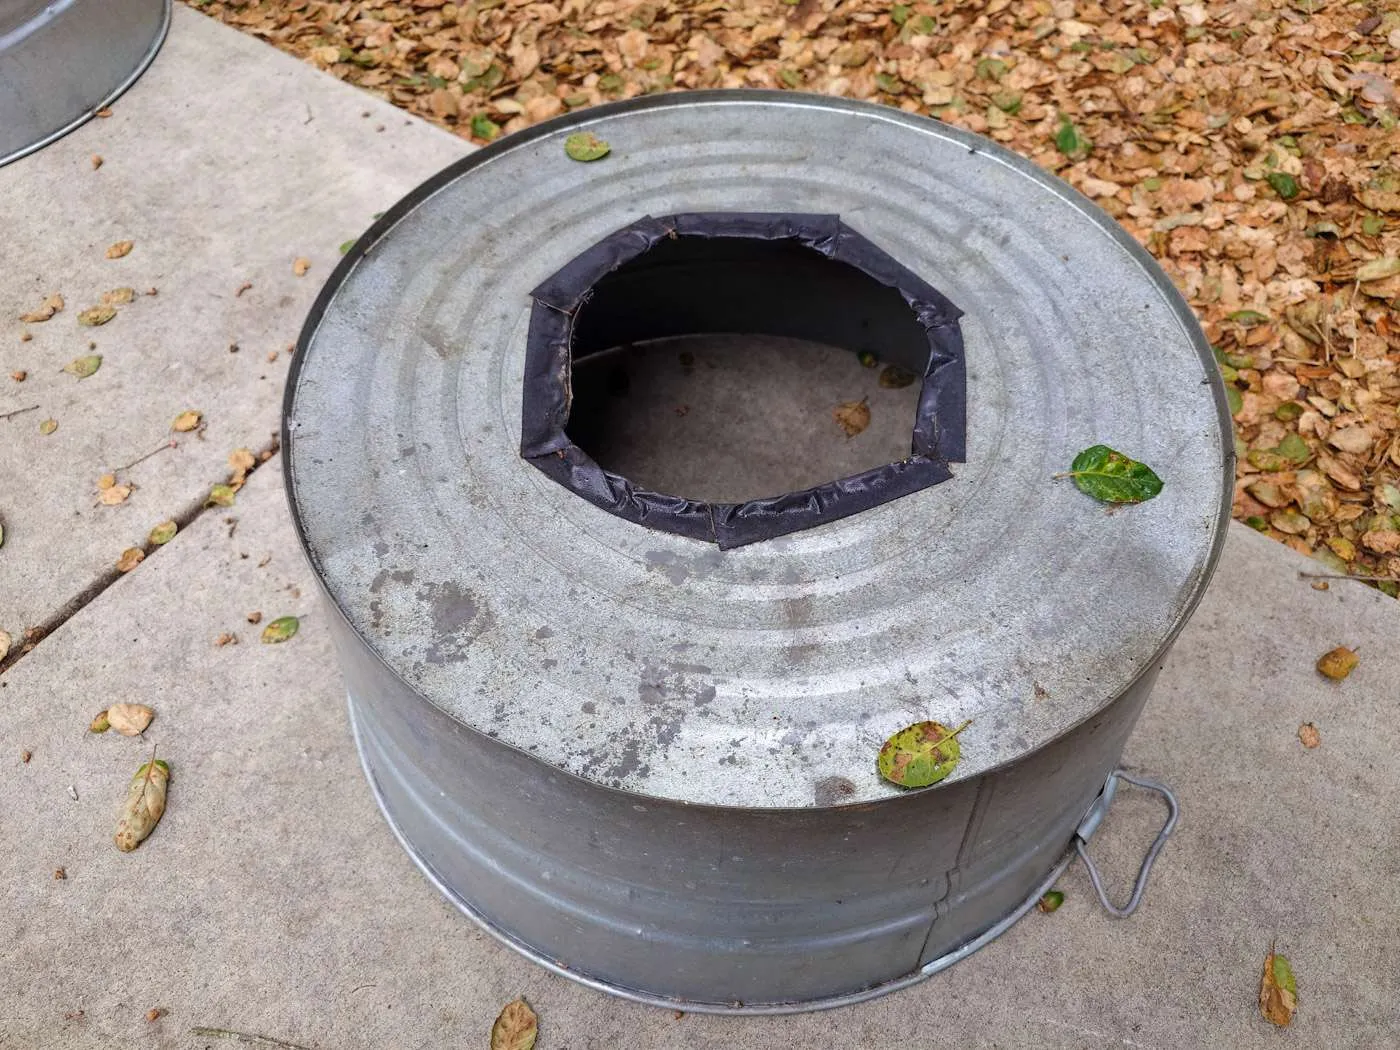 A metal tub is shown upside down, the bottom of the tub has a large hole cut out of the bottom and the edges of the hole have been lined with duct tape to protect from the sharp edges. 